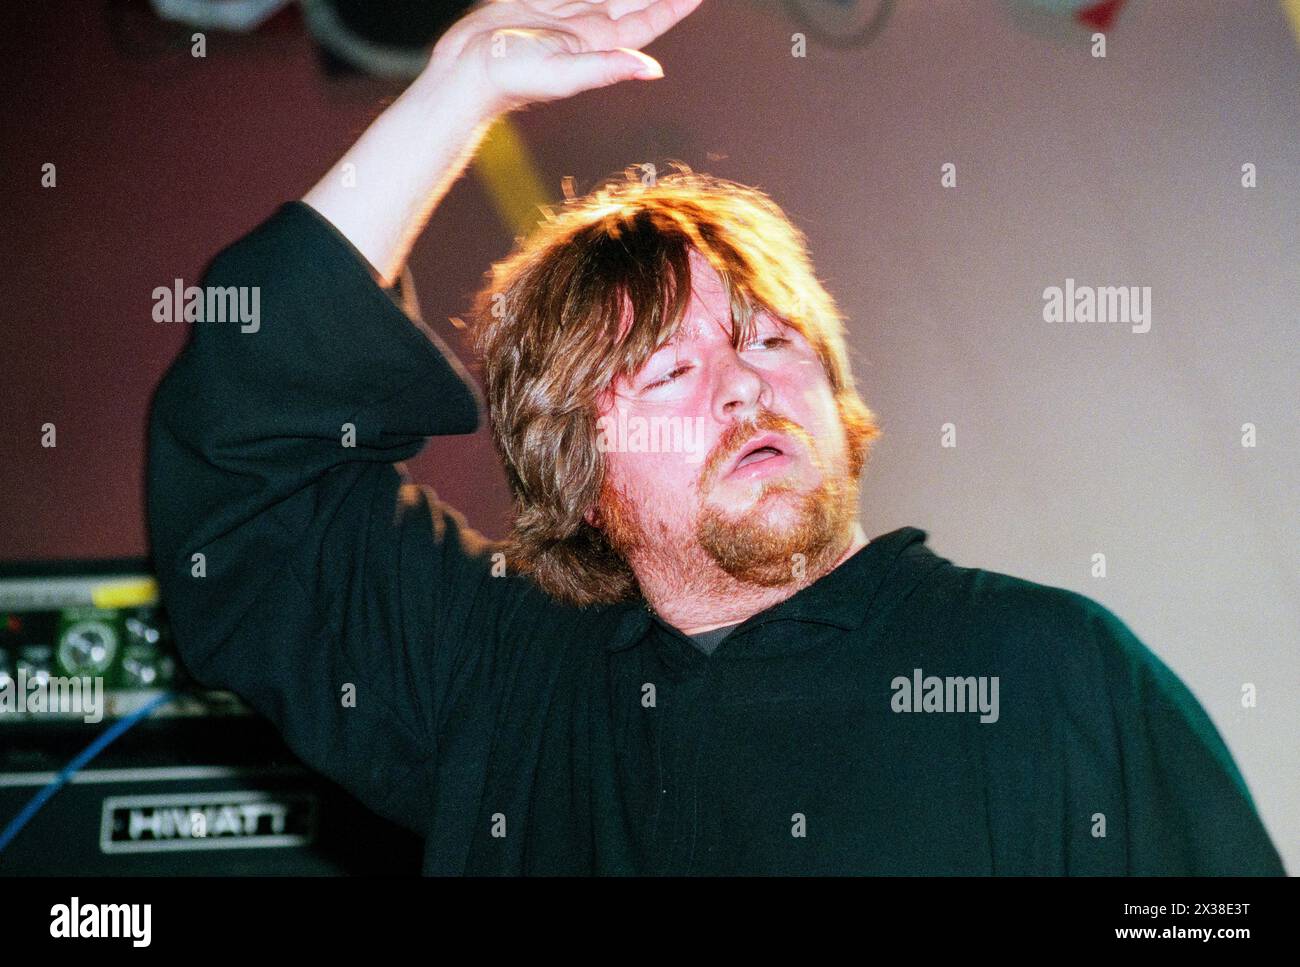 SOUNDTRACK OF OUR LIVES, READING FESTIVAL, 1998: A young Ebbot Lundberg of the Swedish band The Soundtrack Of Our Lives on the Melody Maker Stage at Reading Festival, Reading, England, UK on 28 August 1998. Photo: Rob Watkins.  INFO: Soundtrack of Our Lives, a Swedish rock band formed in 1995 in Gothenburg, emerged as pioneers of the '90s psychedelic rock revival. Their expansive soundscapes and energetic performances garnered critical acclaim. Stock Photo